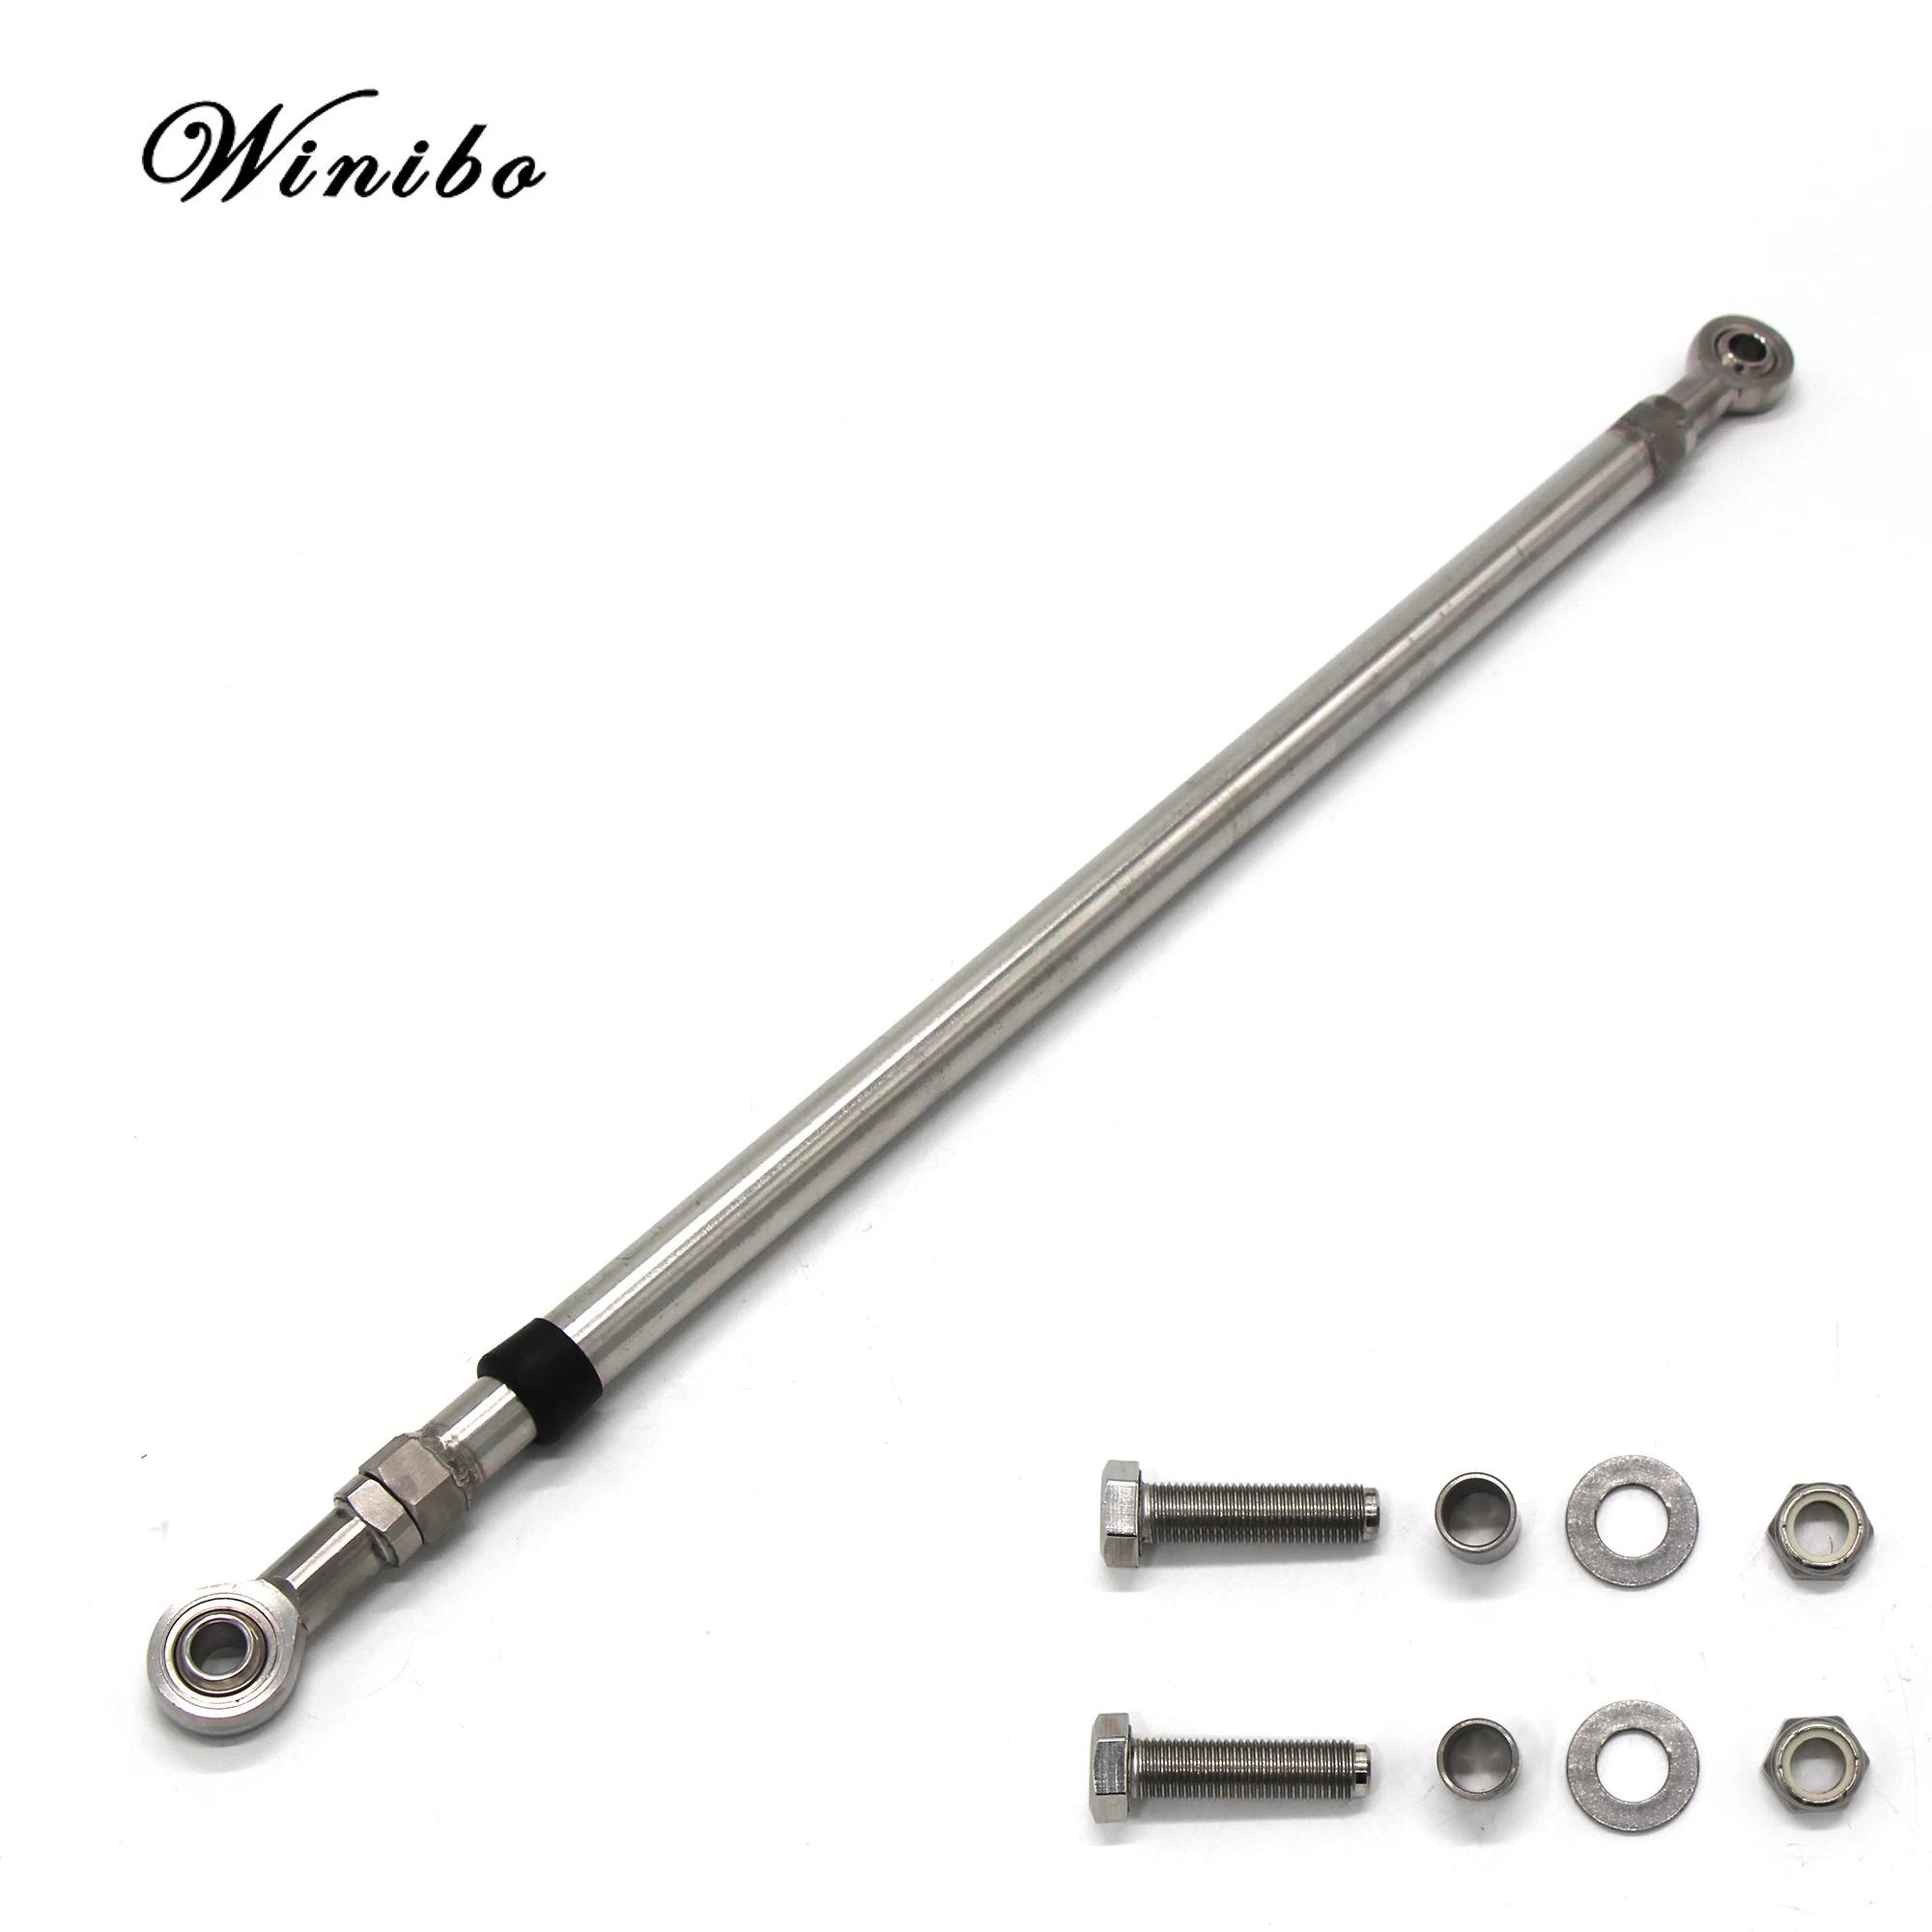 Adjustable Stainless Steel Rustproof Tie Bar for Multi-Engine Boats Marine Twin Engine Outboard Connecting Rods